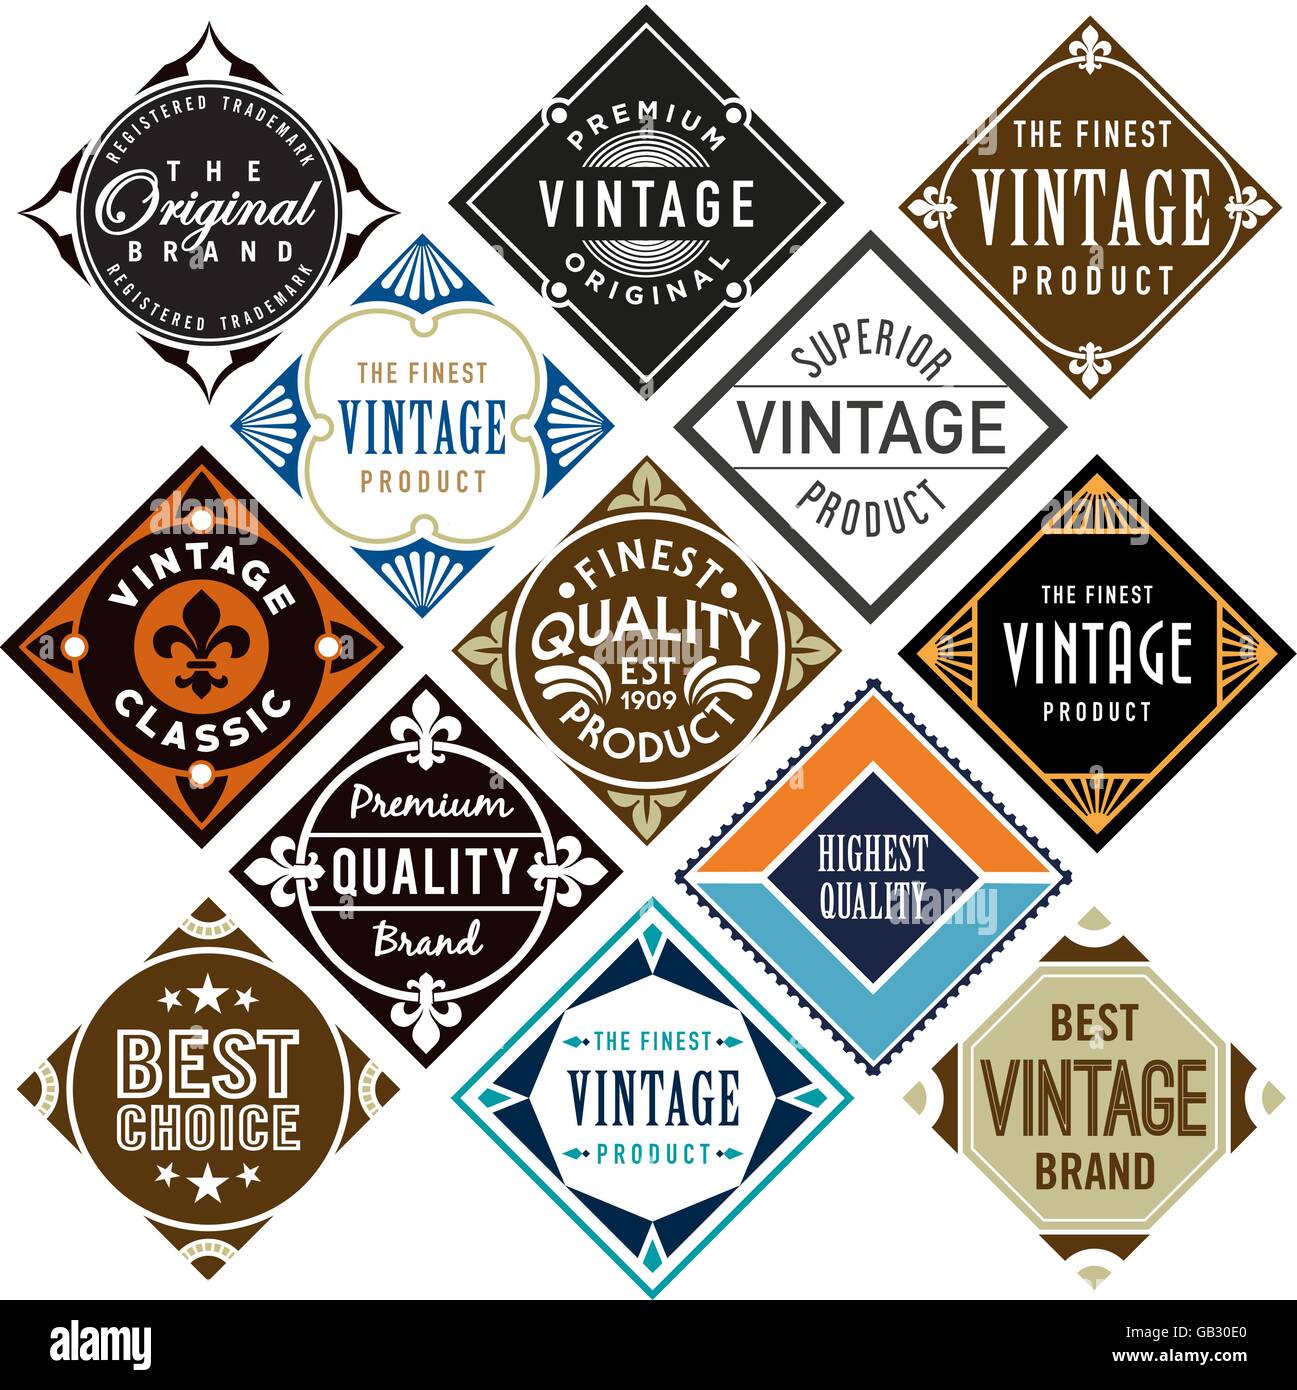 Set or diamond shaped vintage labels Stock Vector